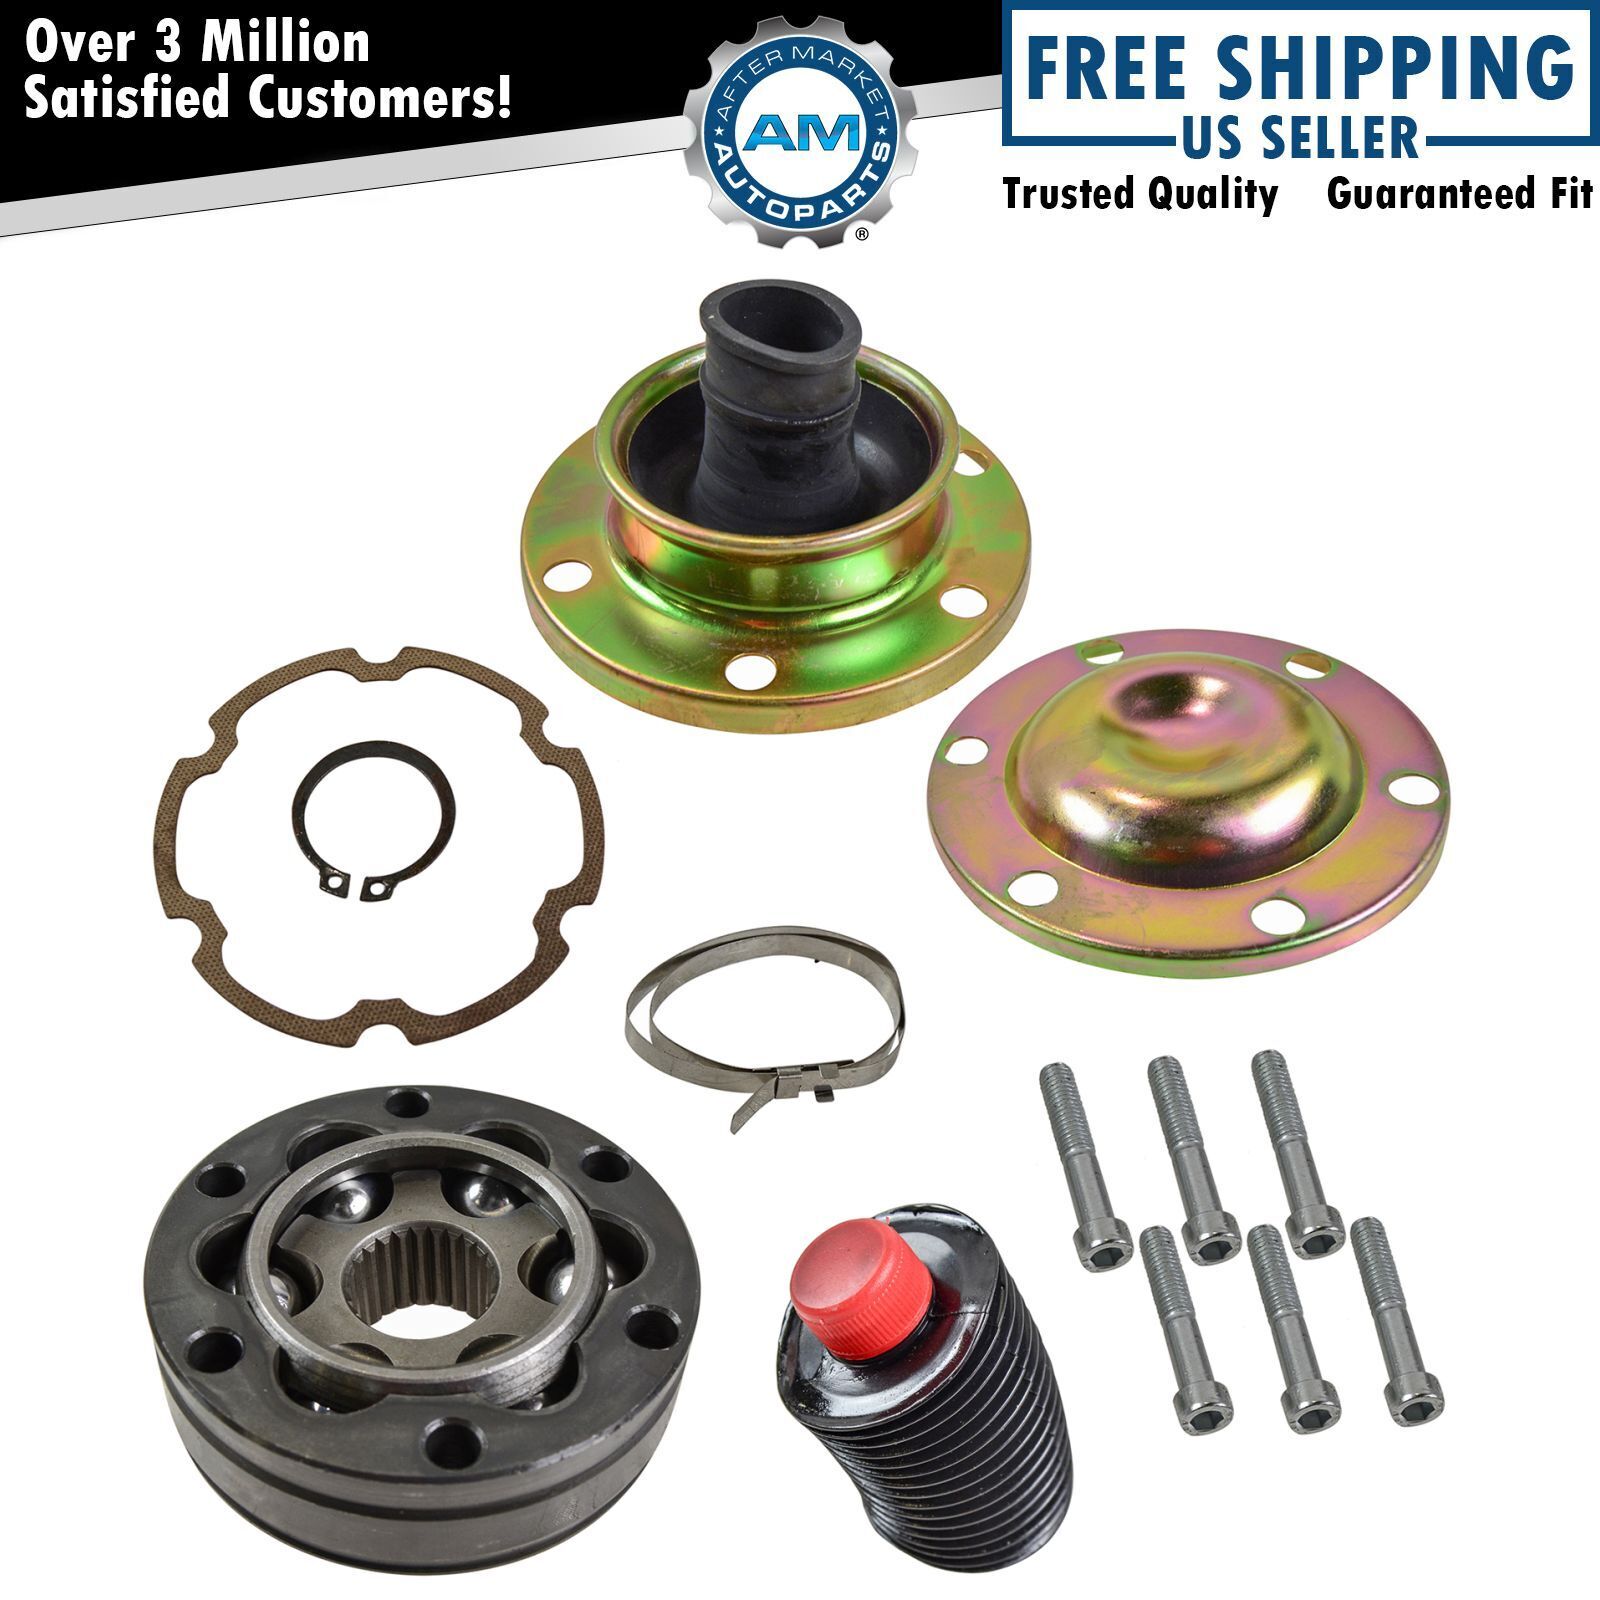 Front Driveshaft Rear CV Joint Rebuild Kit for Jeep Liberty